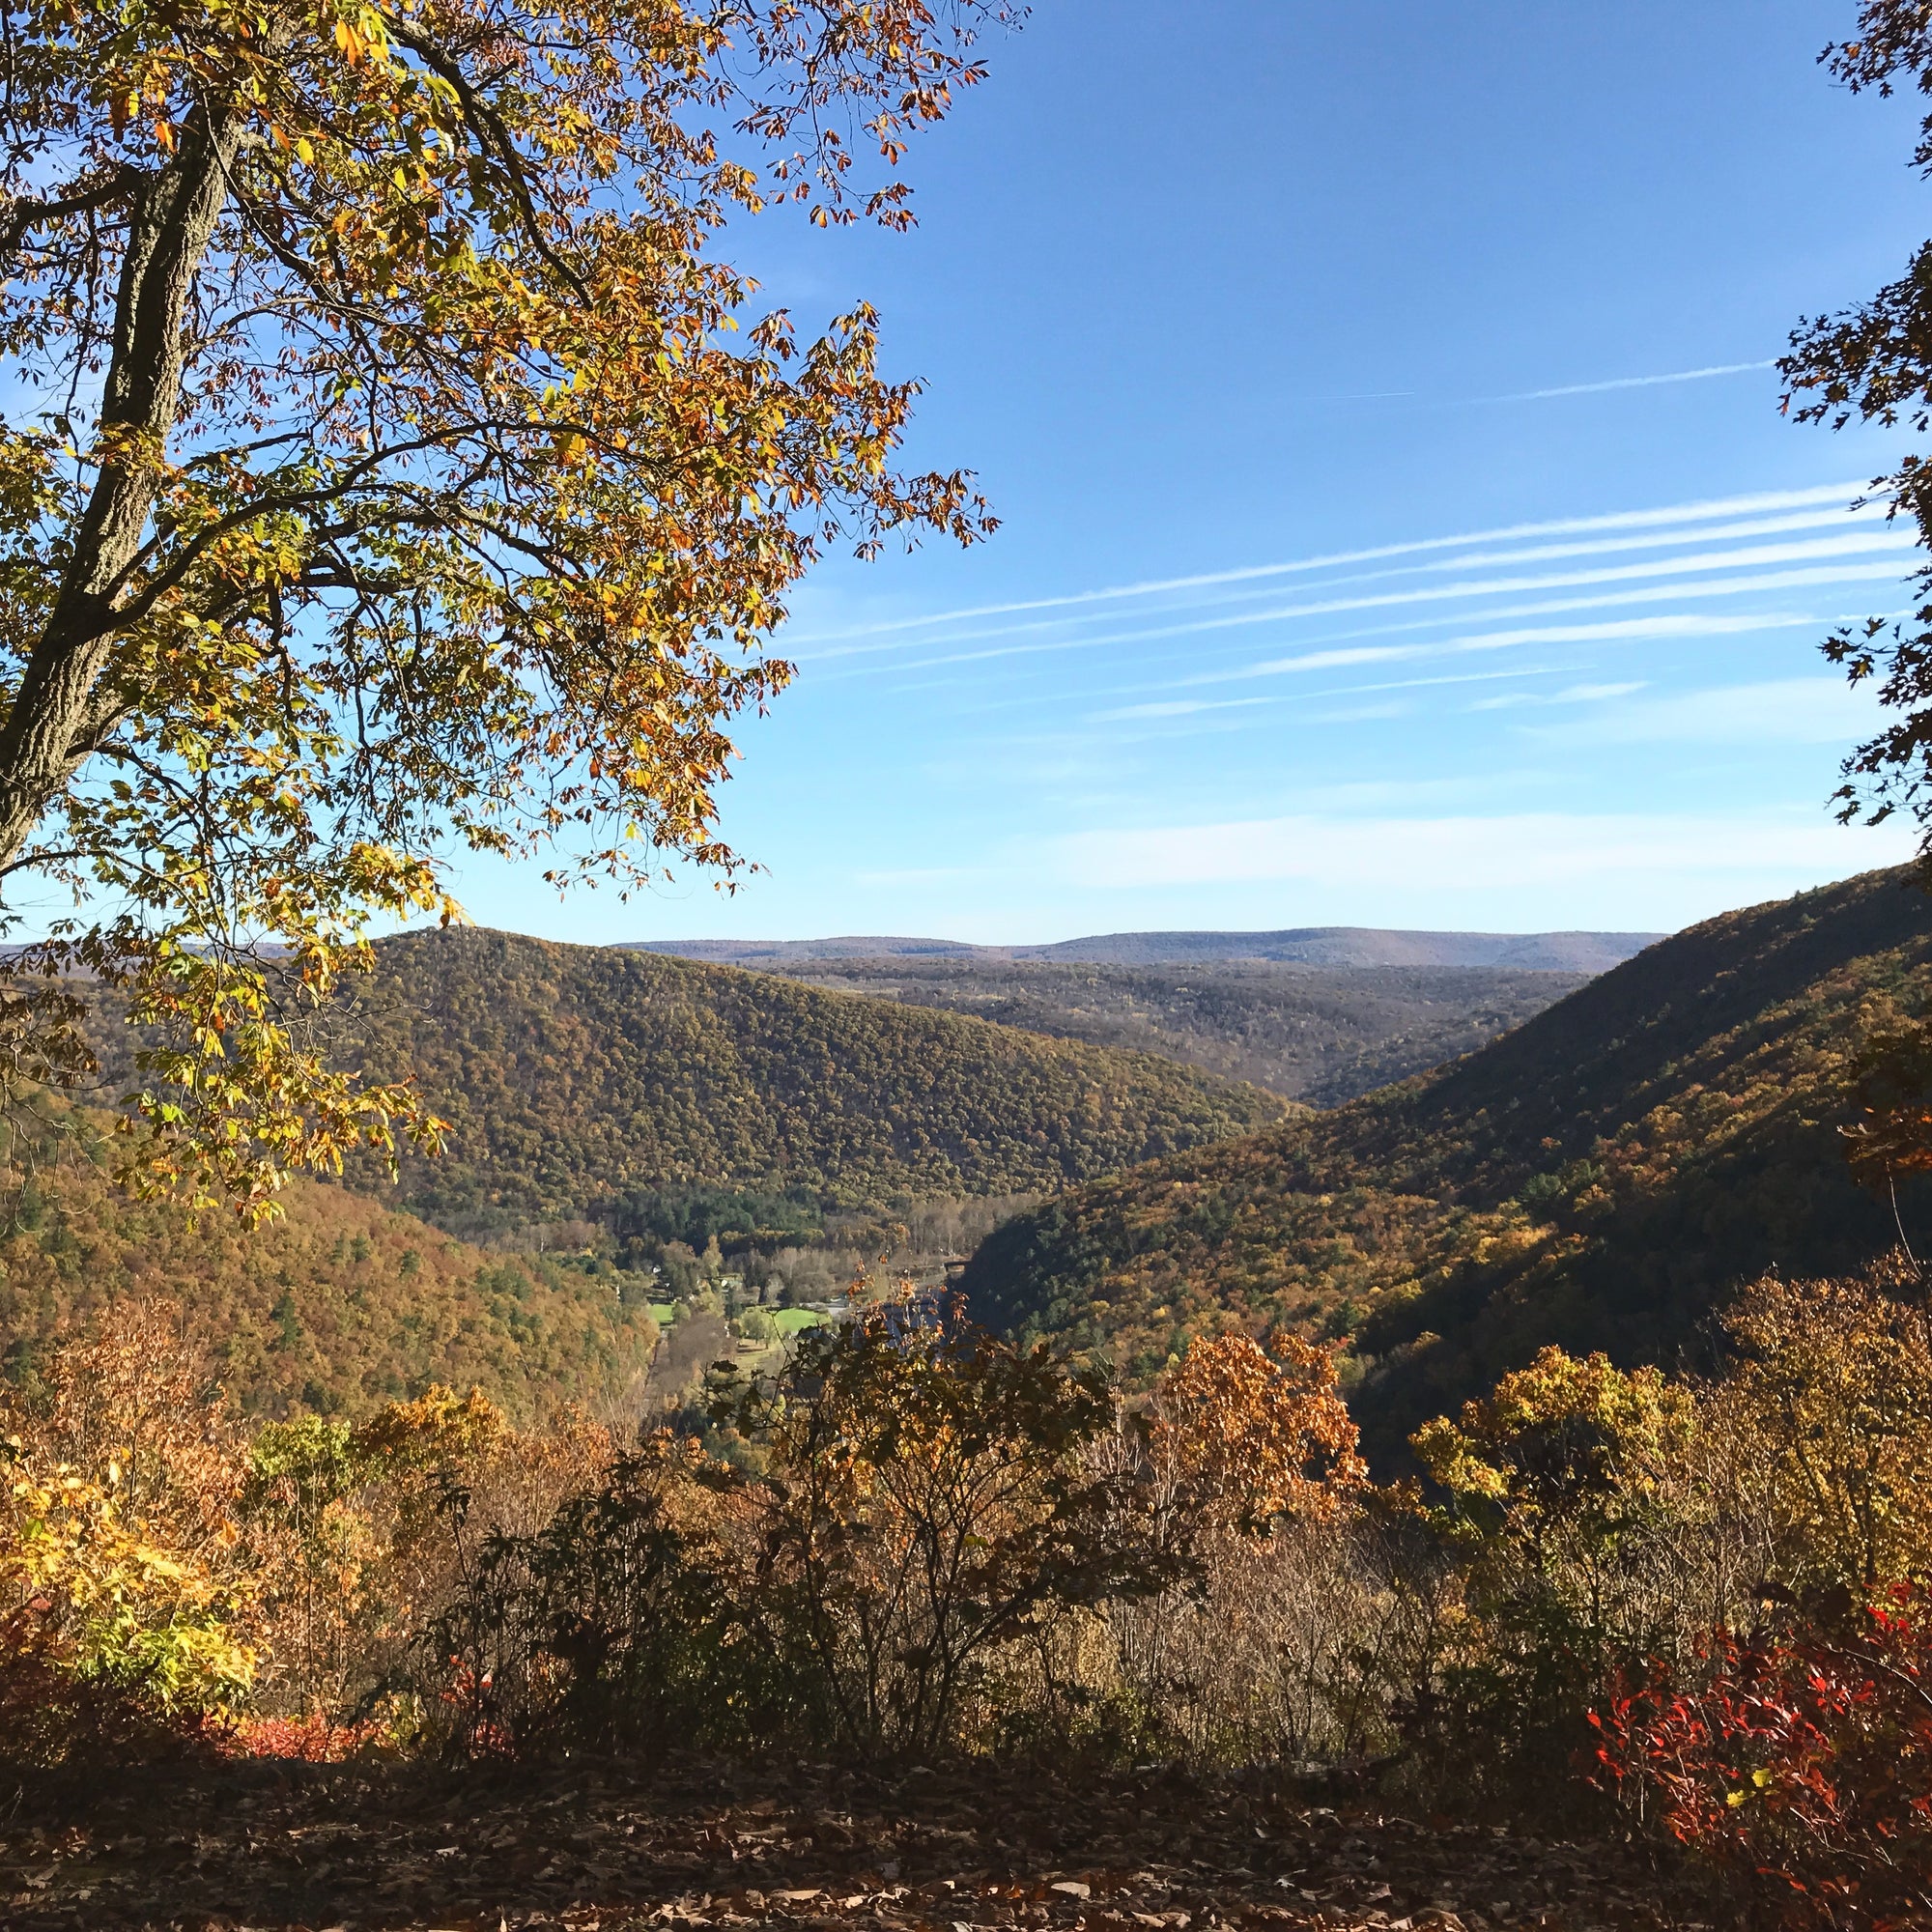 Finding Fall Backpacking Adventure in Pine Creek, PA